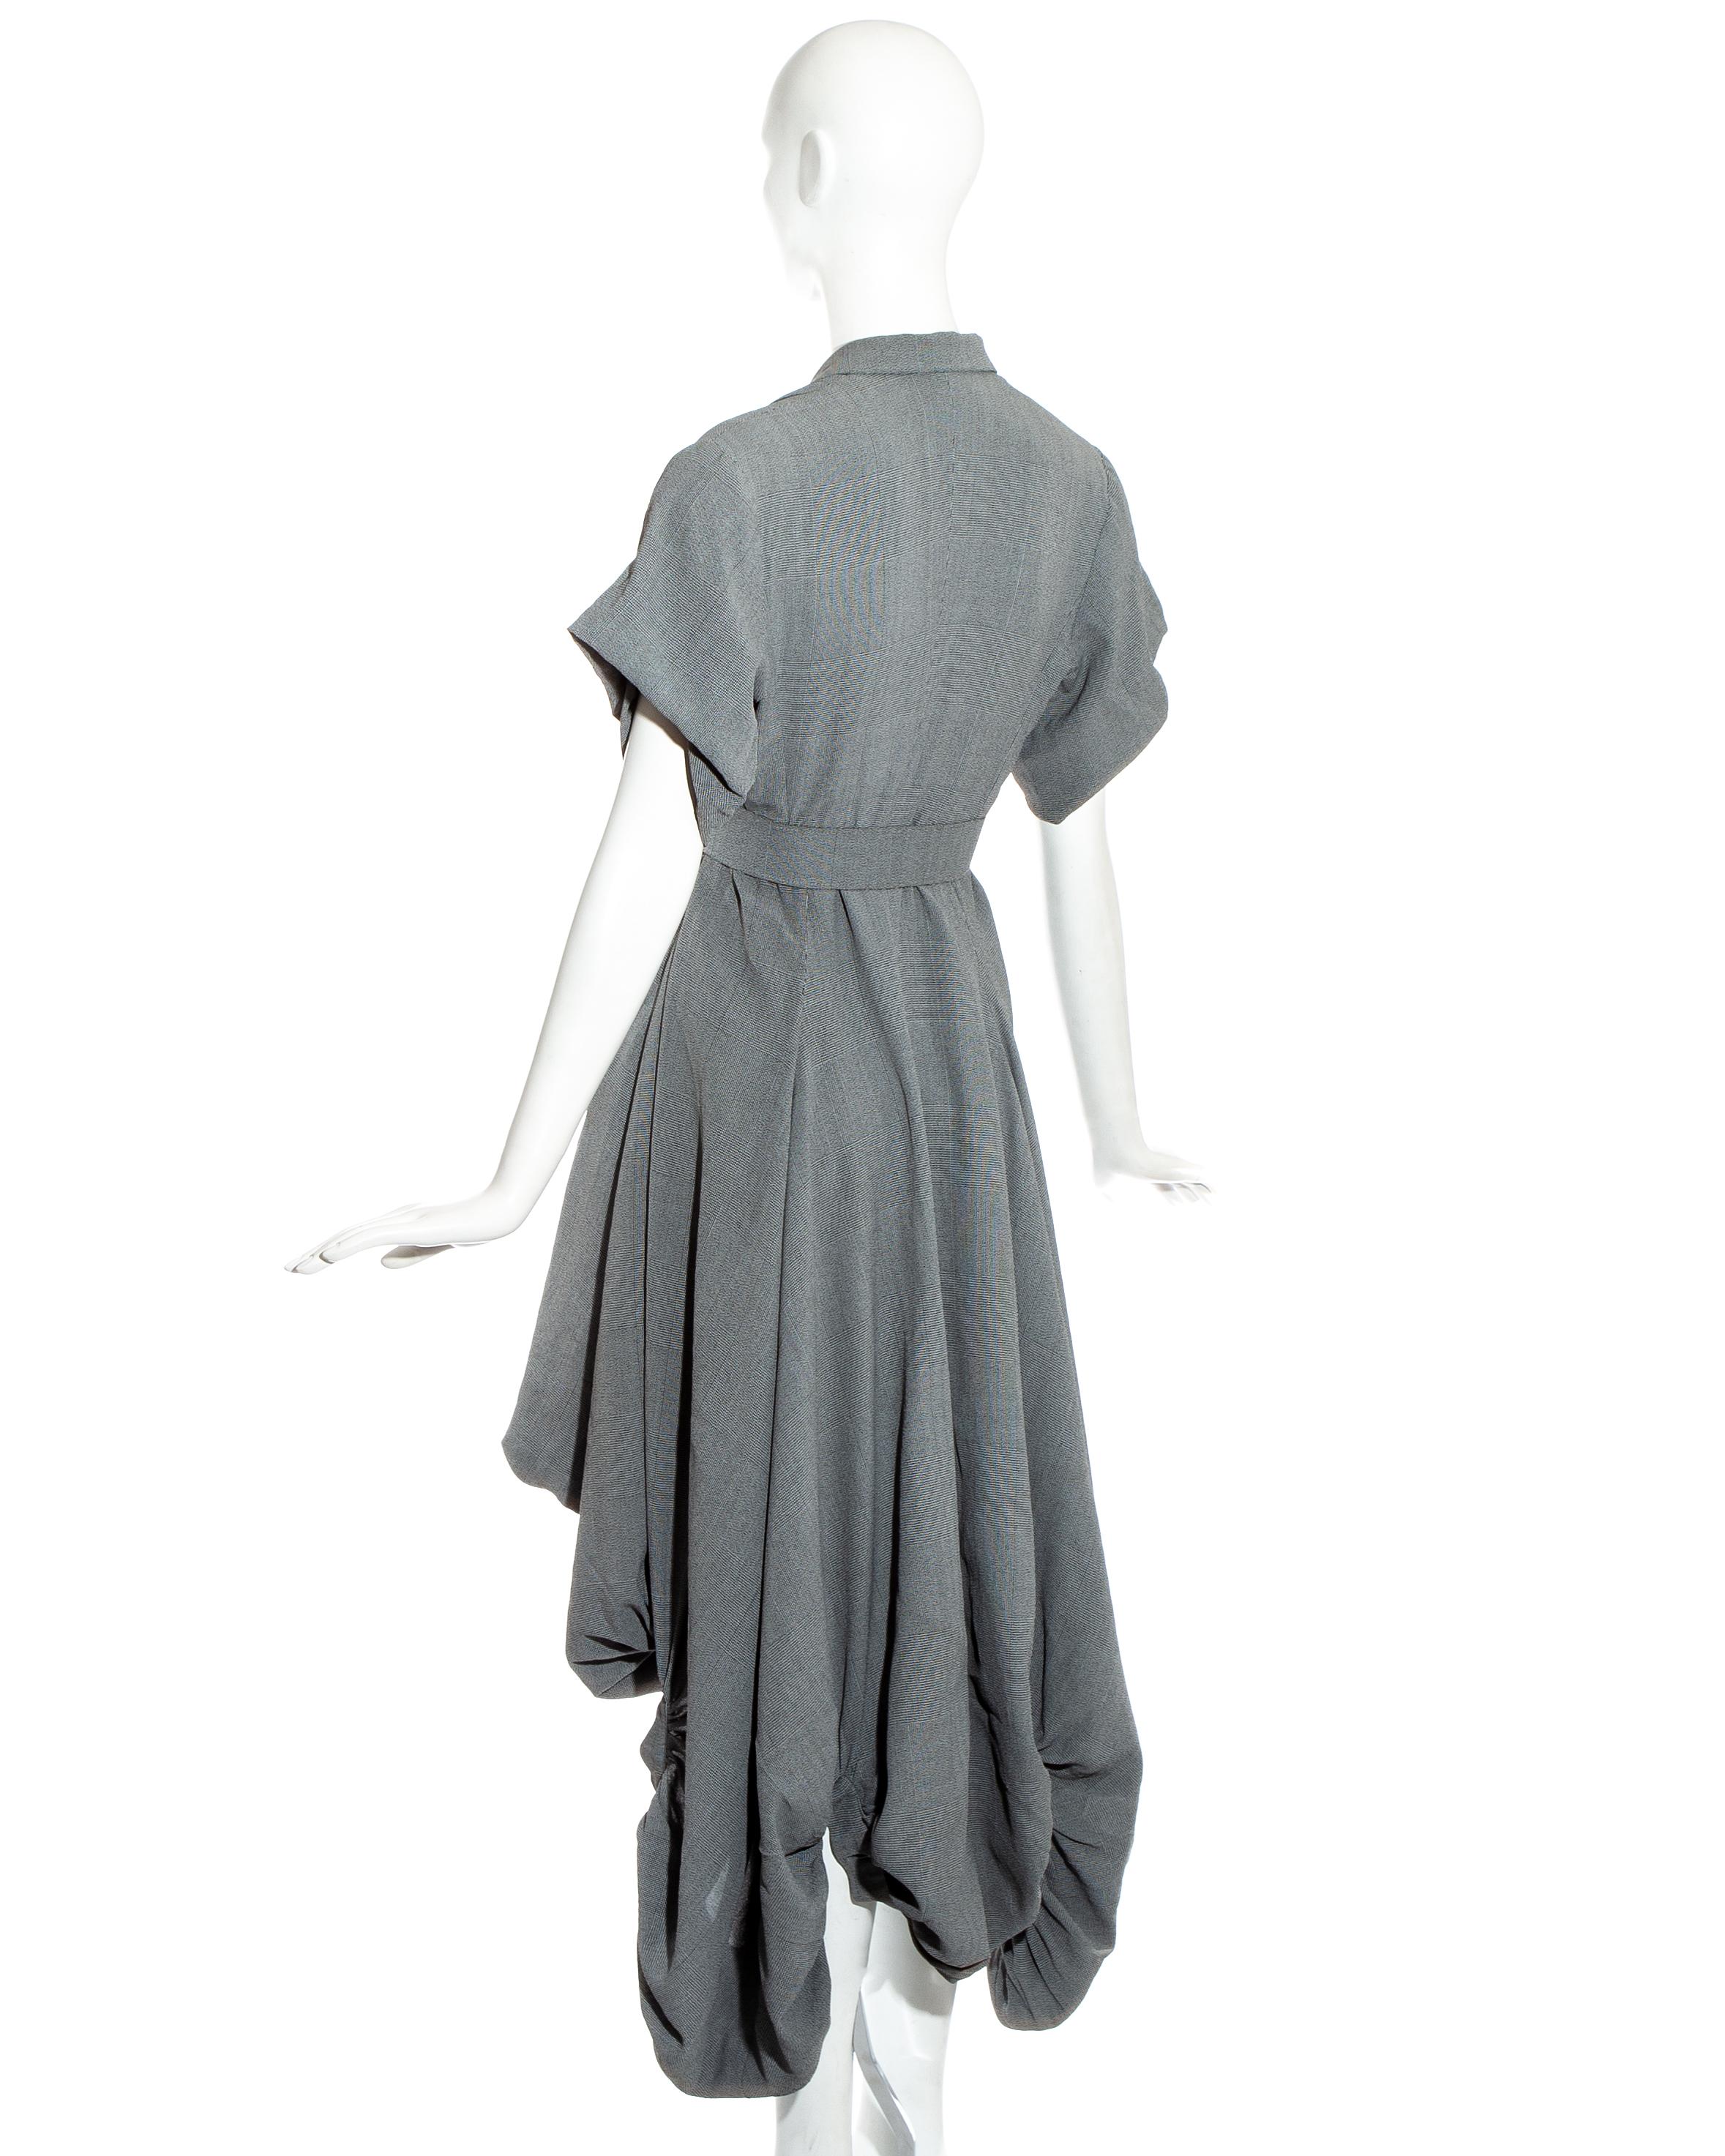 John Galliano grey checked Blanche Dubois bustled coat dress, ss 1988 For Sale 1